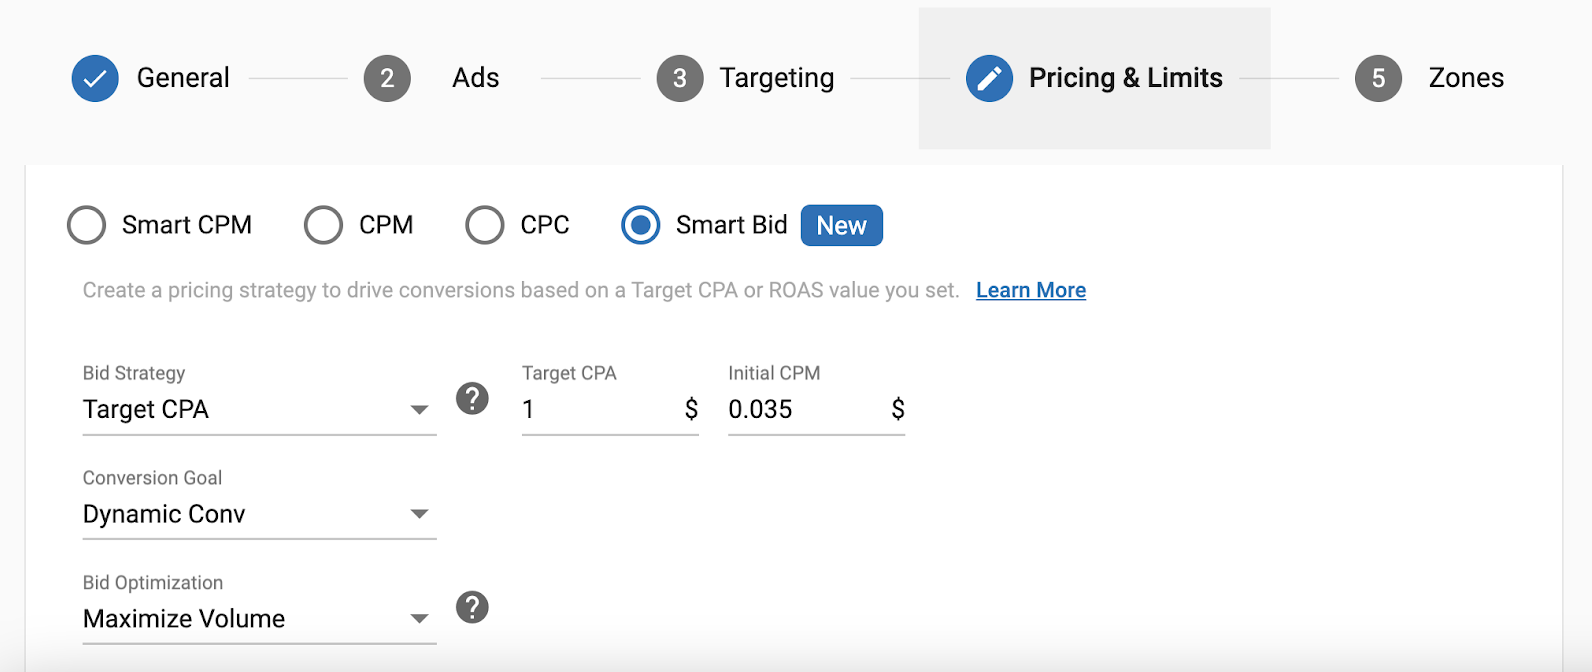 How to optimize your advertising campaign in Brazil with Smart Bid